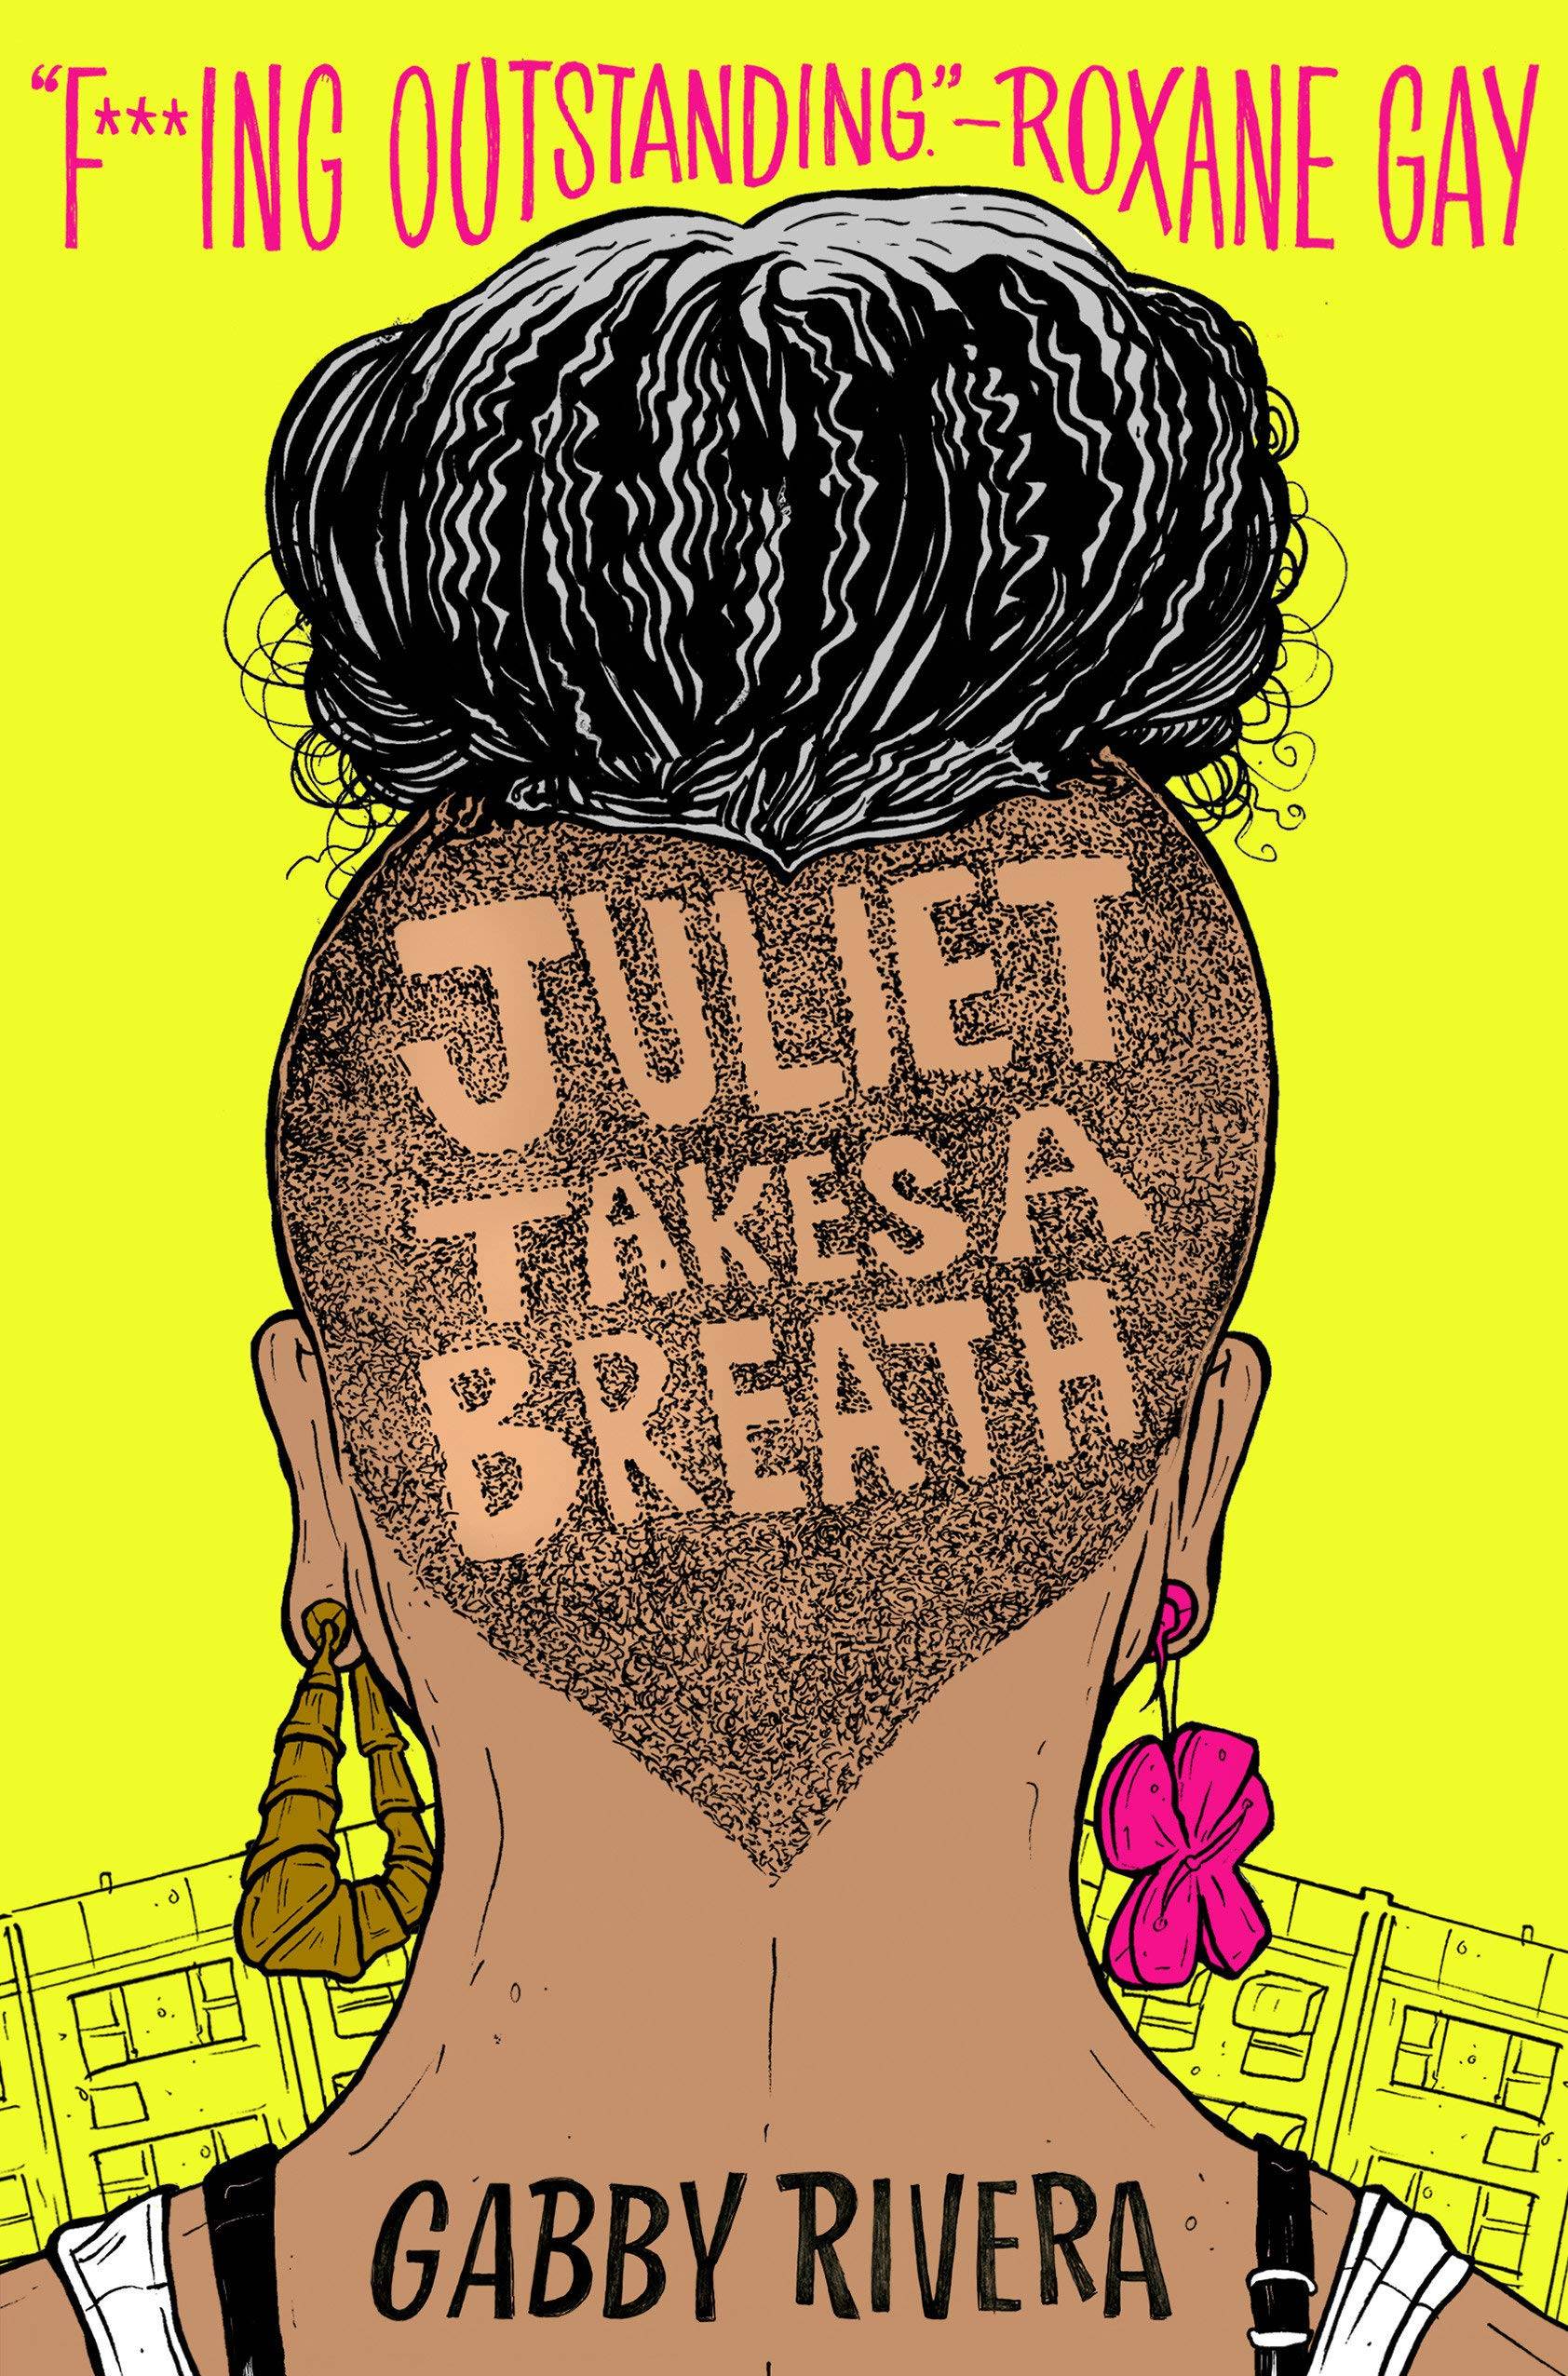 "Juliet takes a breath" cover featuring an illustration of the back of a person's head with their hair up in a bun and the title of the book shaved into their undercut.